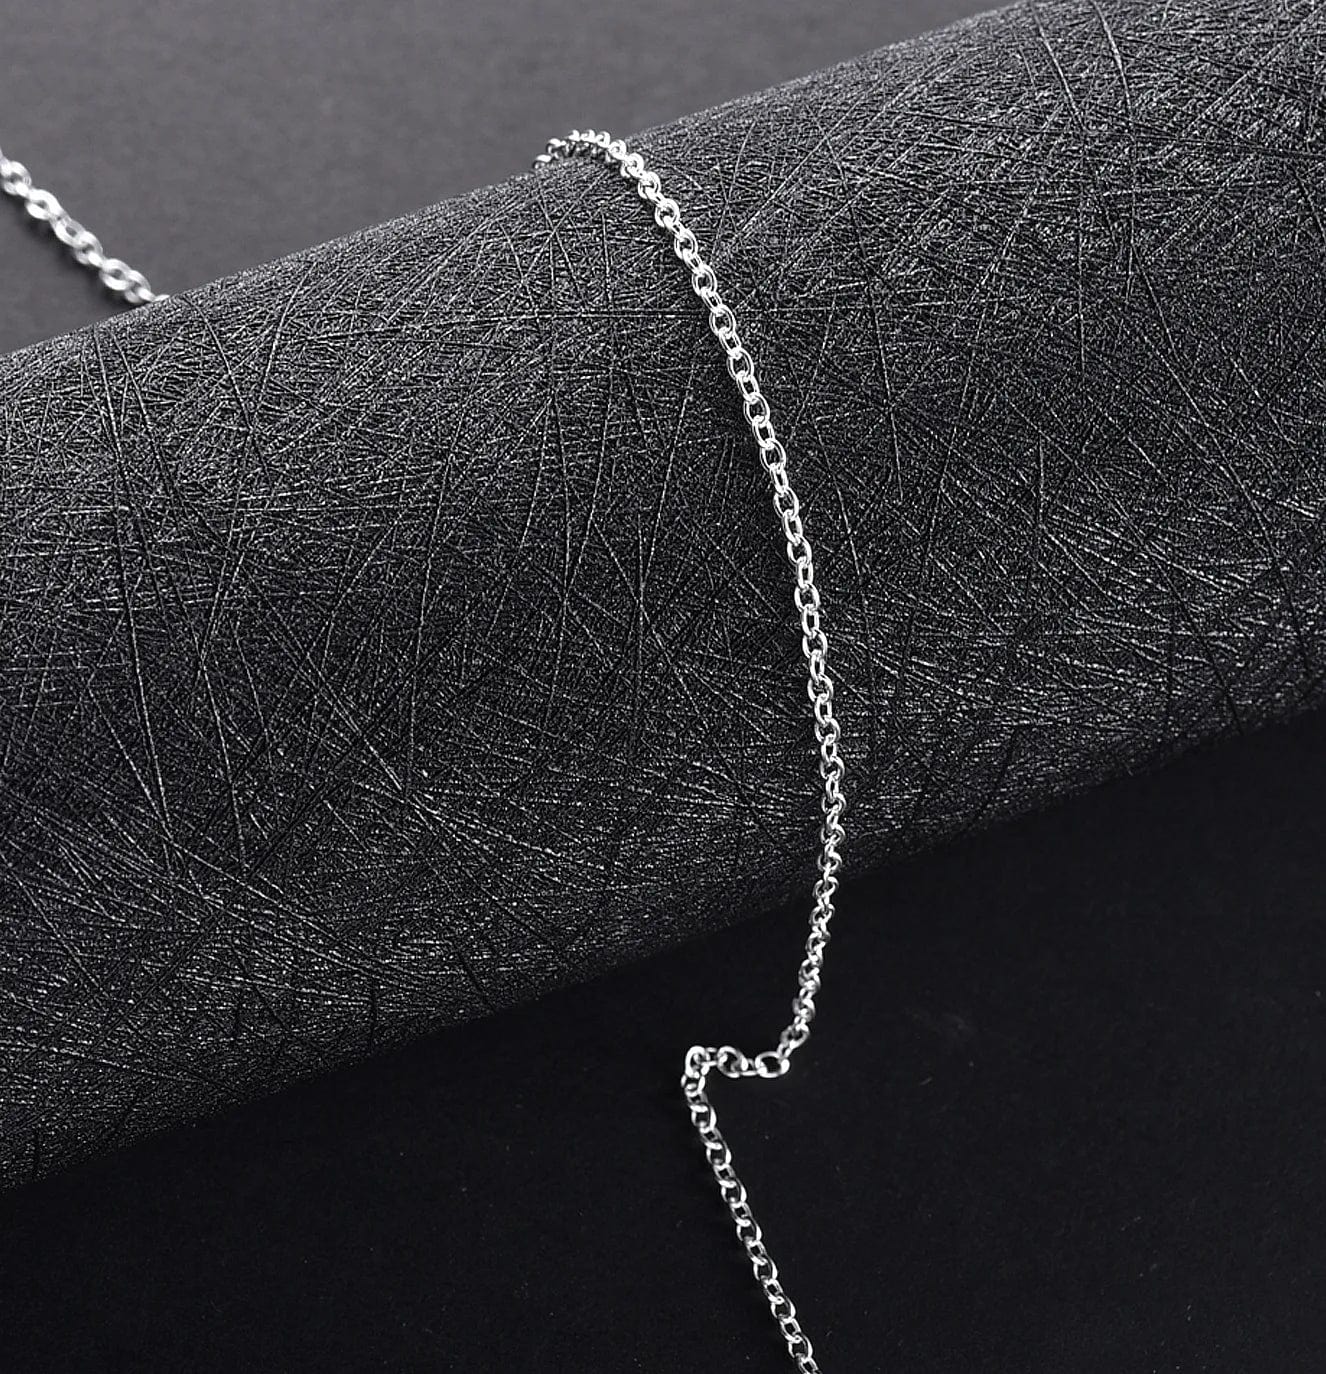 Wholesale 925 Sterling Silver 5pcs/Lot 18'' 45cm Fine Chain O-Chain Necklaces For Women Fashion Jewelry Silver Necklace